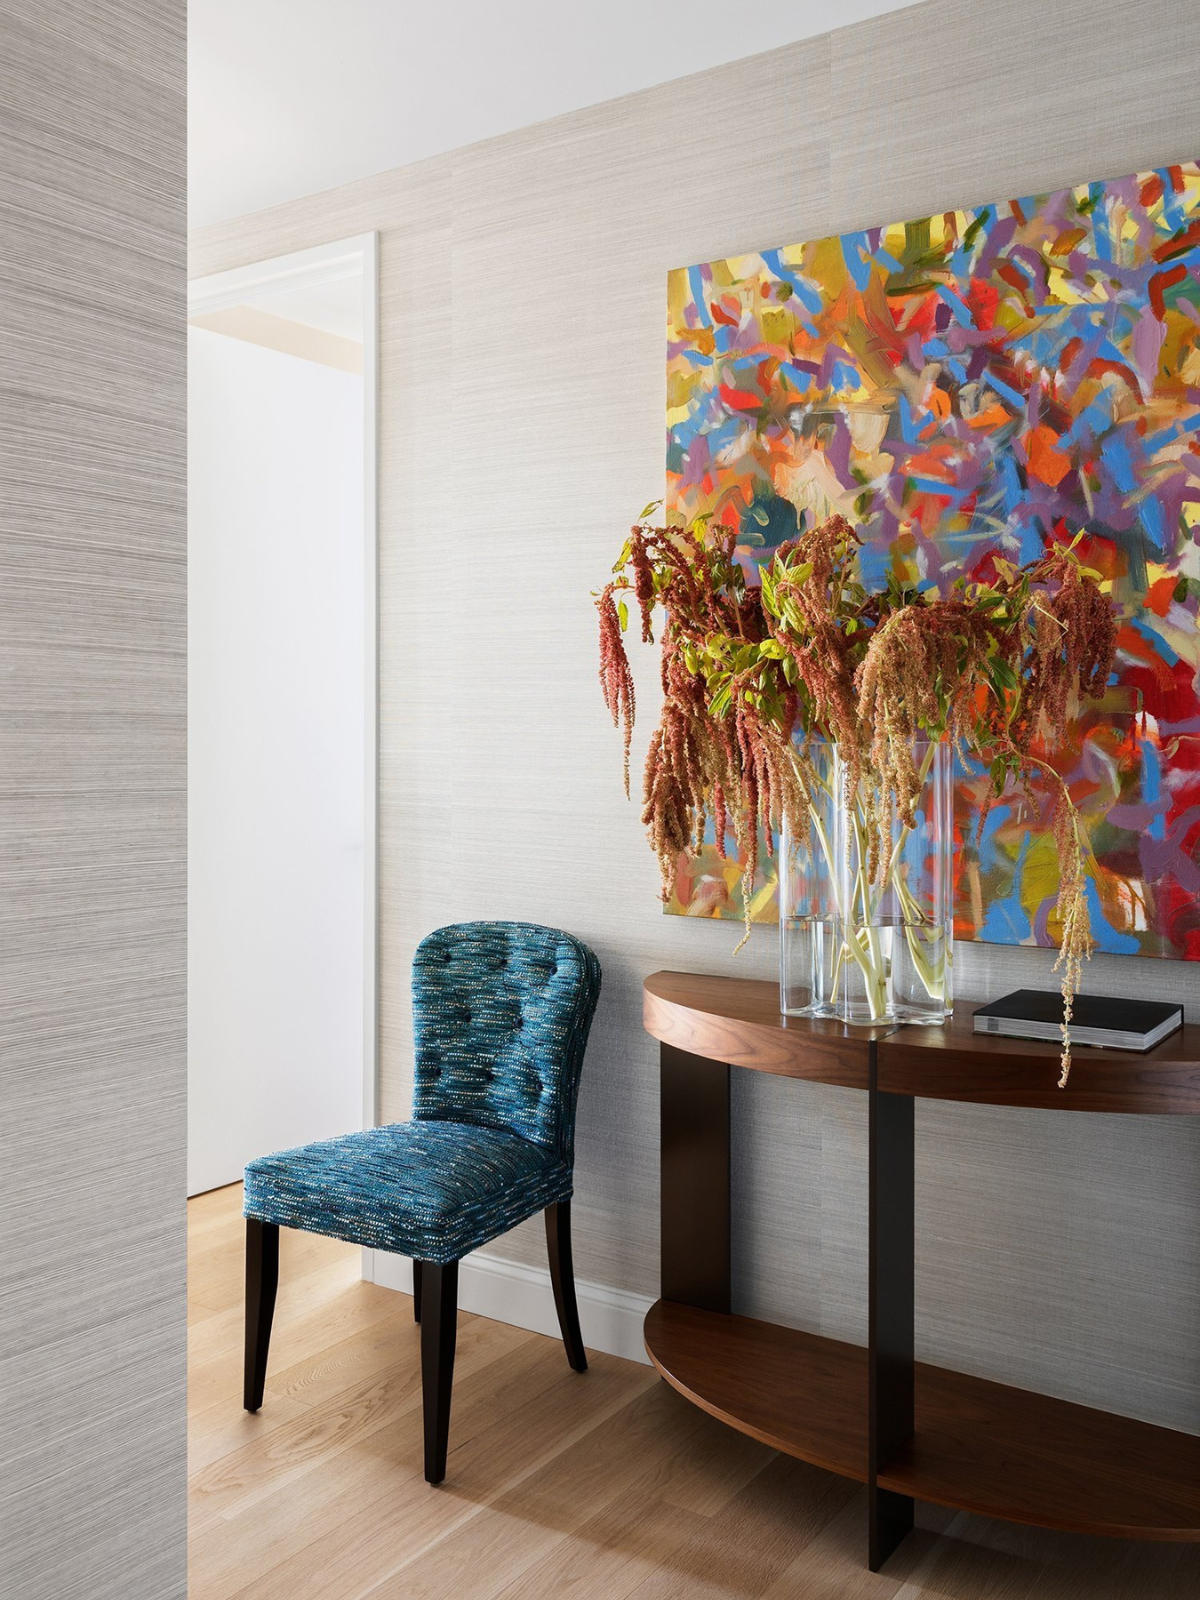 hallway with feature artwork on wall, wallcovering, lvp flooring and accent upholstered chair and console table